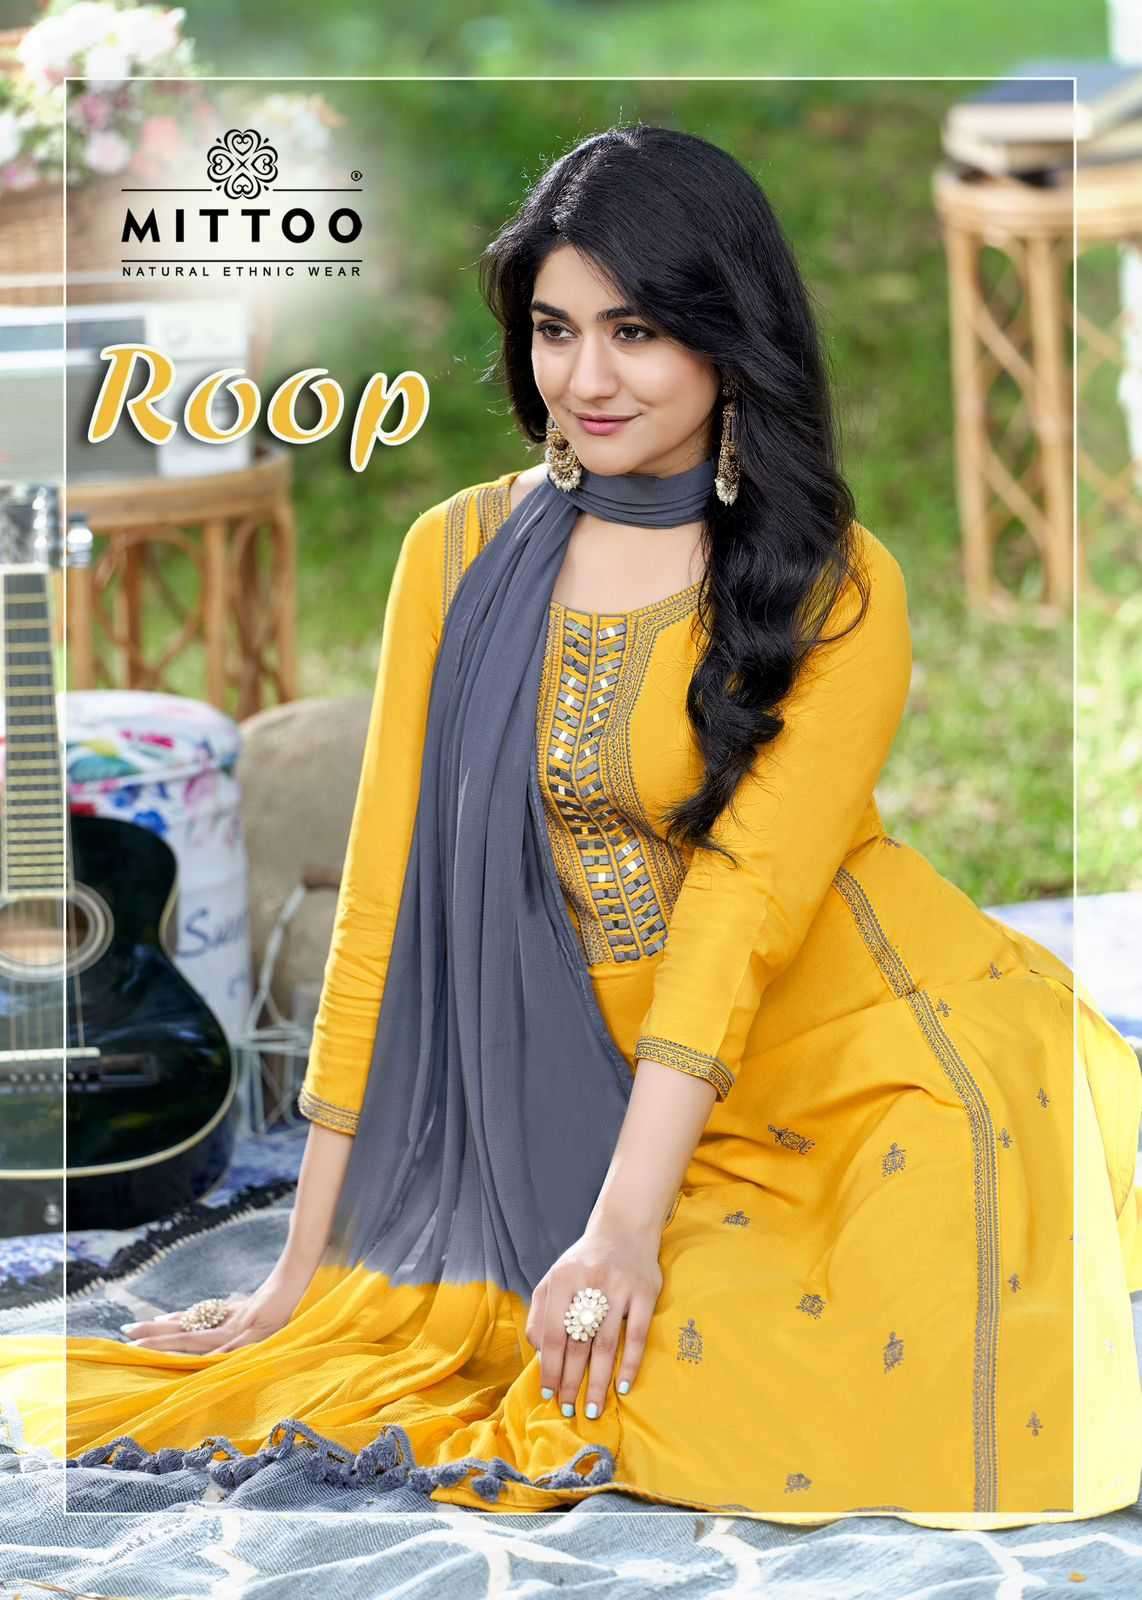 mittoo roop series 2001-2006 Heavy Rayon readymade suit 